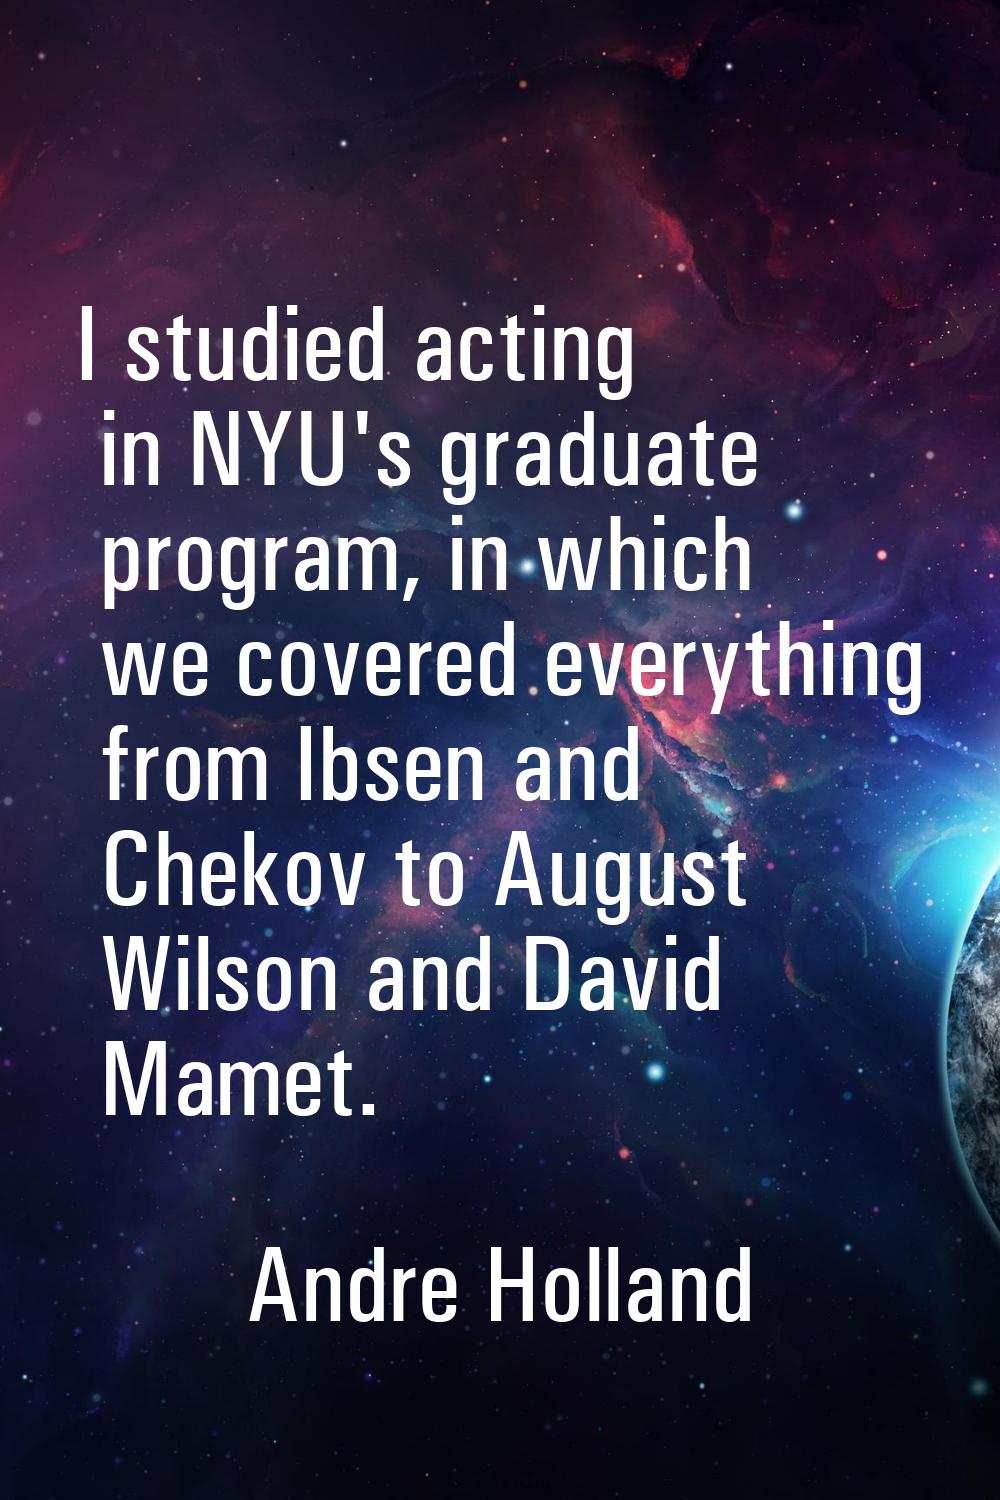 I studied acting in NYU's graduate program, in which we covered everything from Ibsen and Chekov to